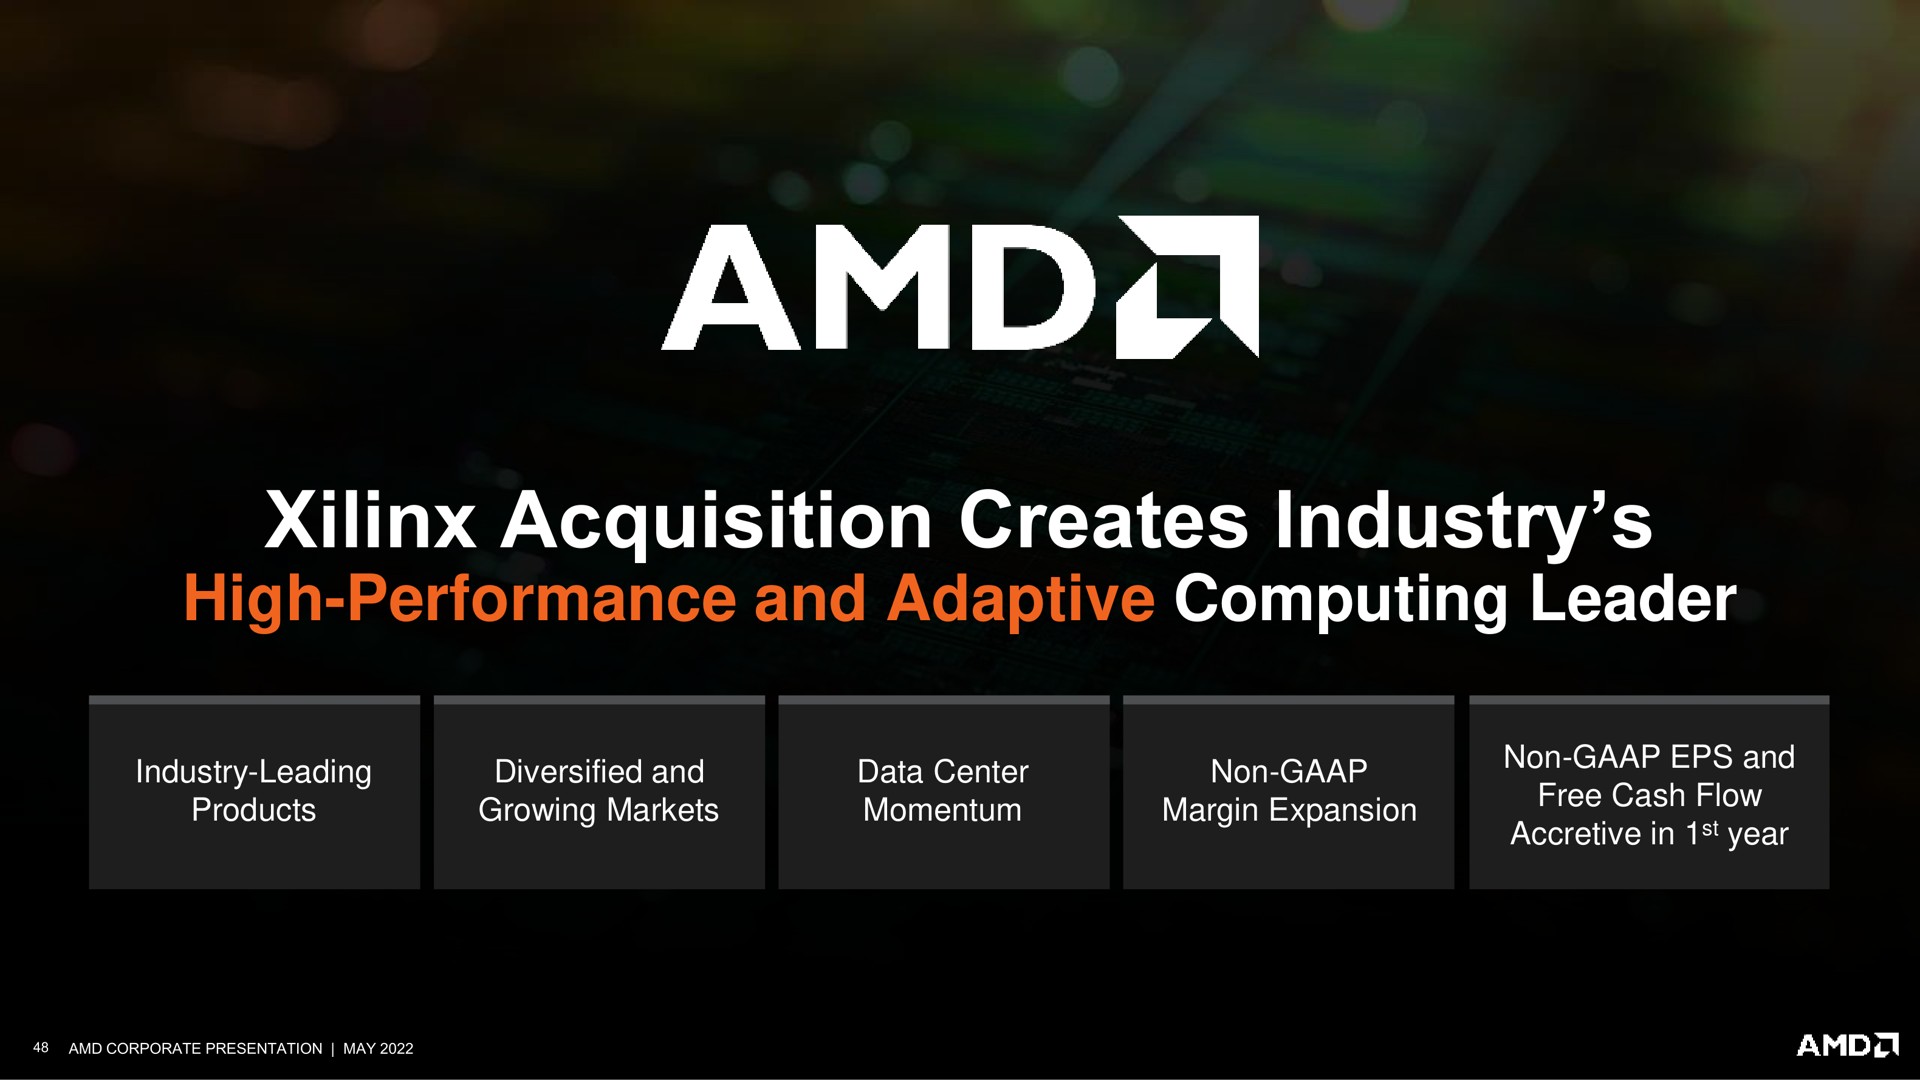 acquisition creates industry high performance and adaptive computing leader | AMD